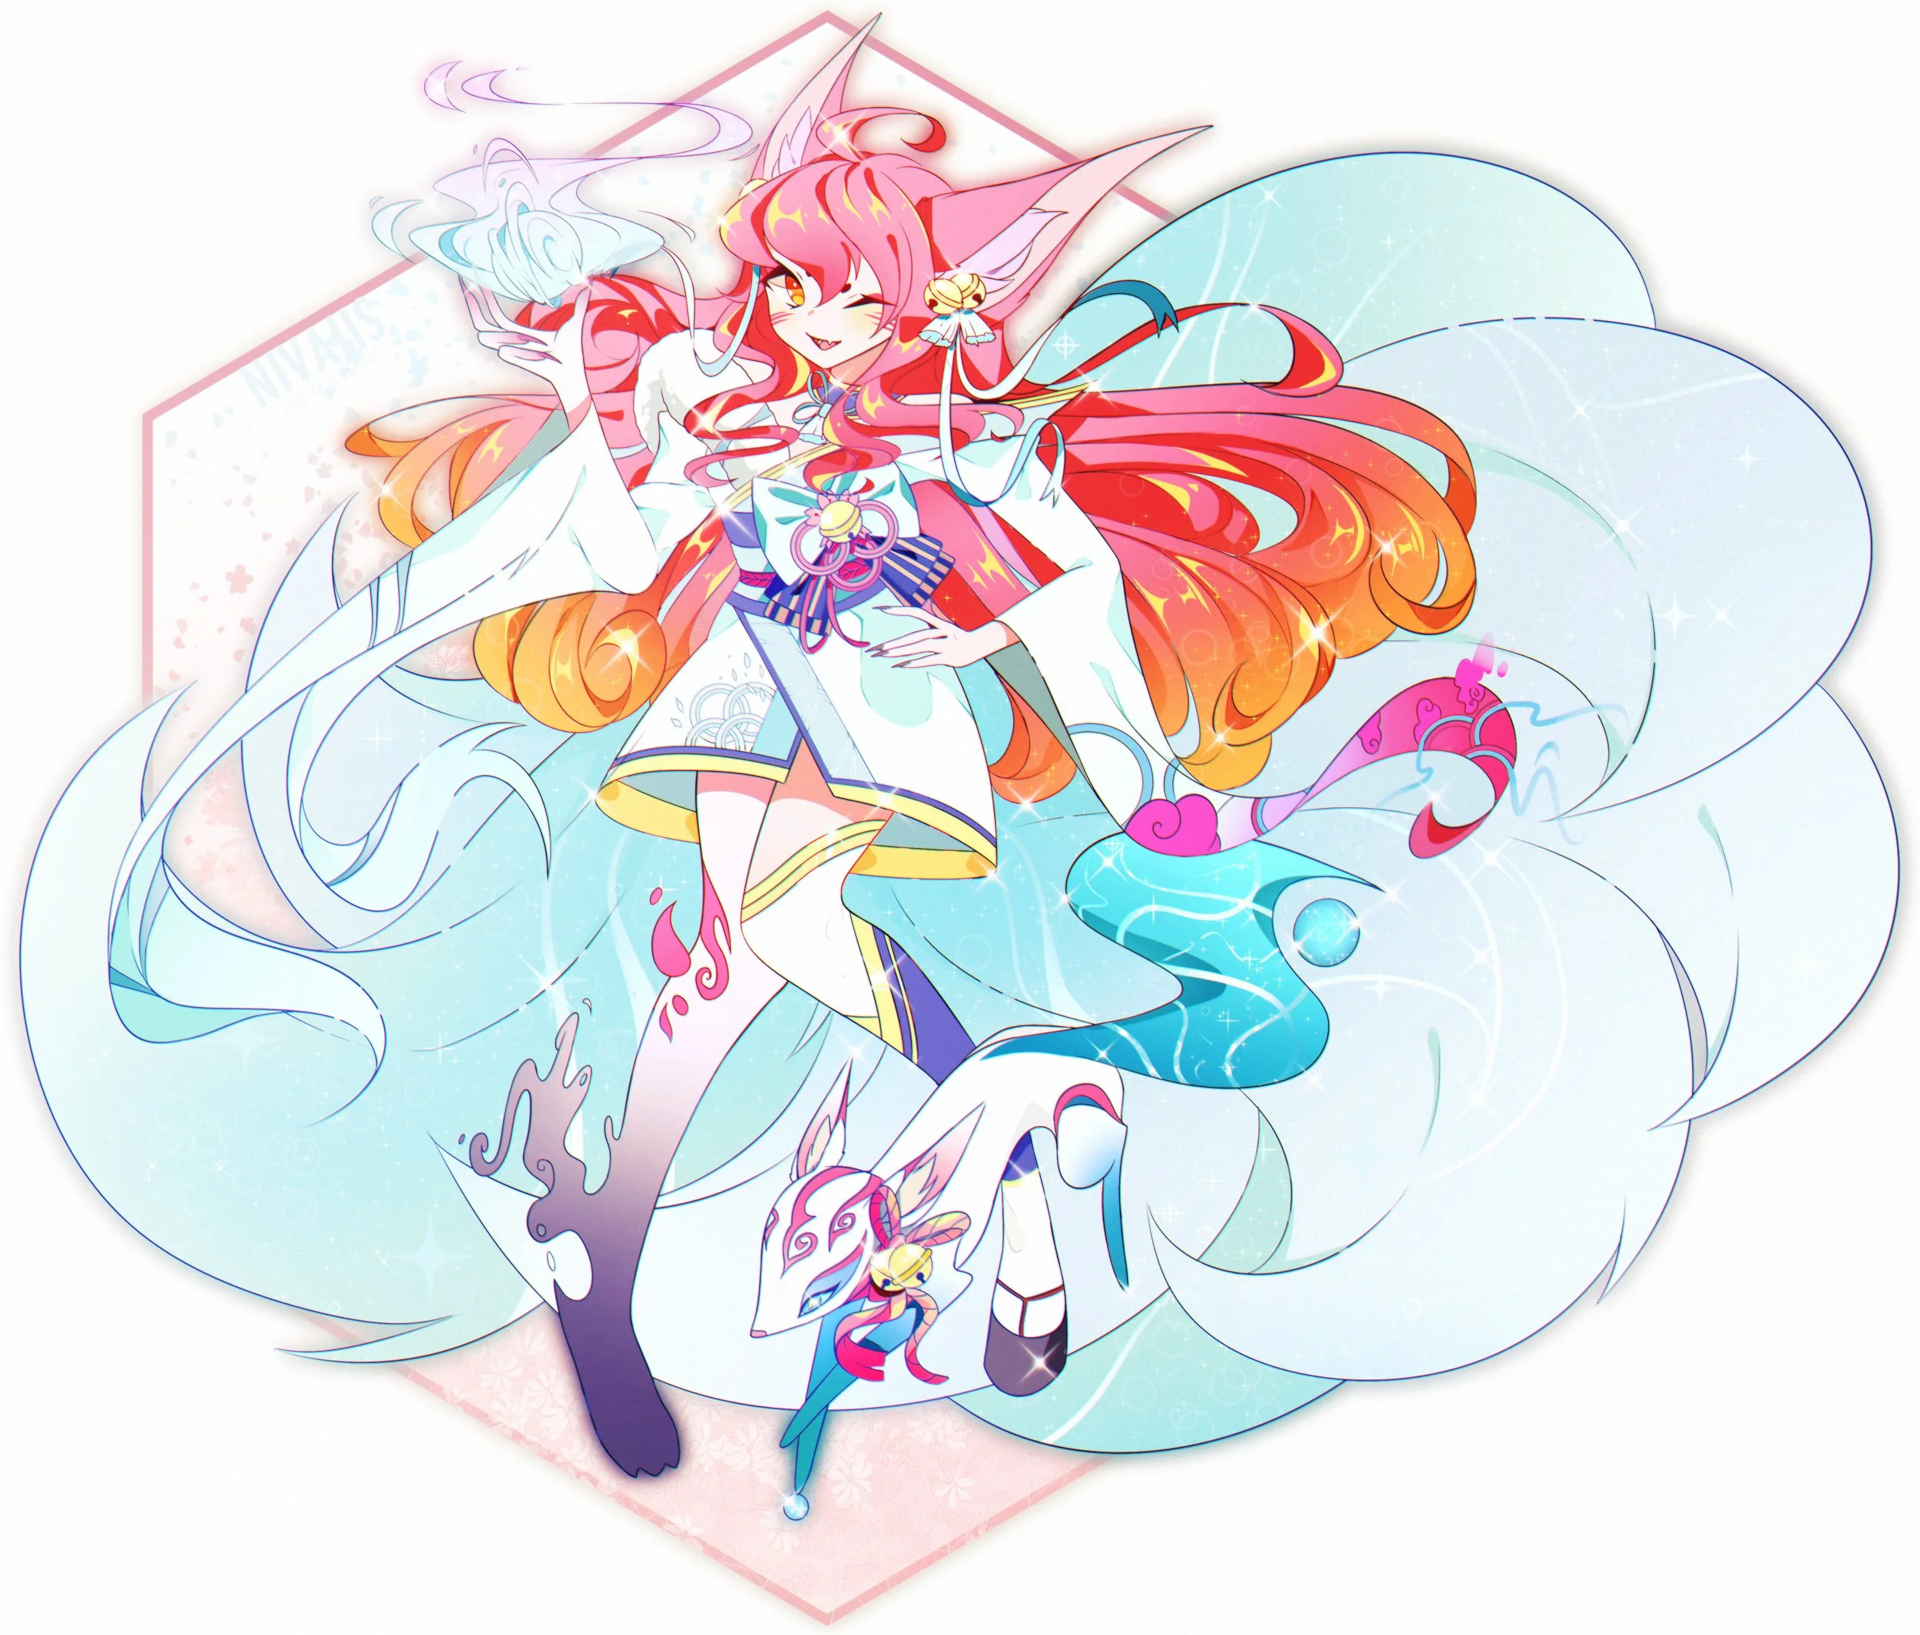 Anime 1920x1635 League of Legends Ahri (League of Legends) fan art anime girls anime white background video game girls video game characters one eye closed pink hair long hair animal ears